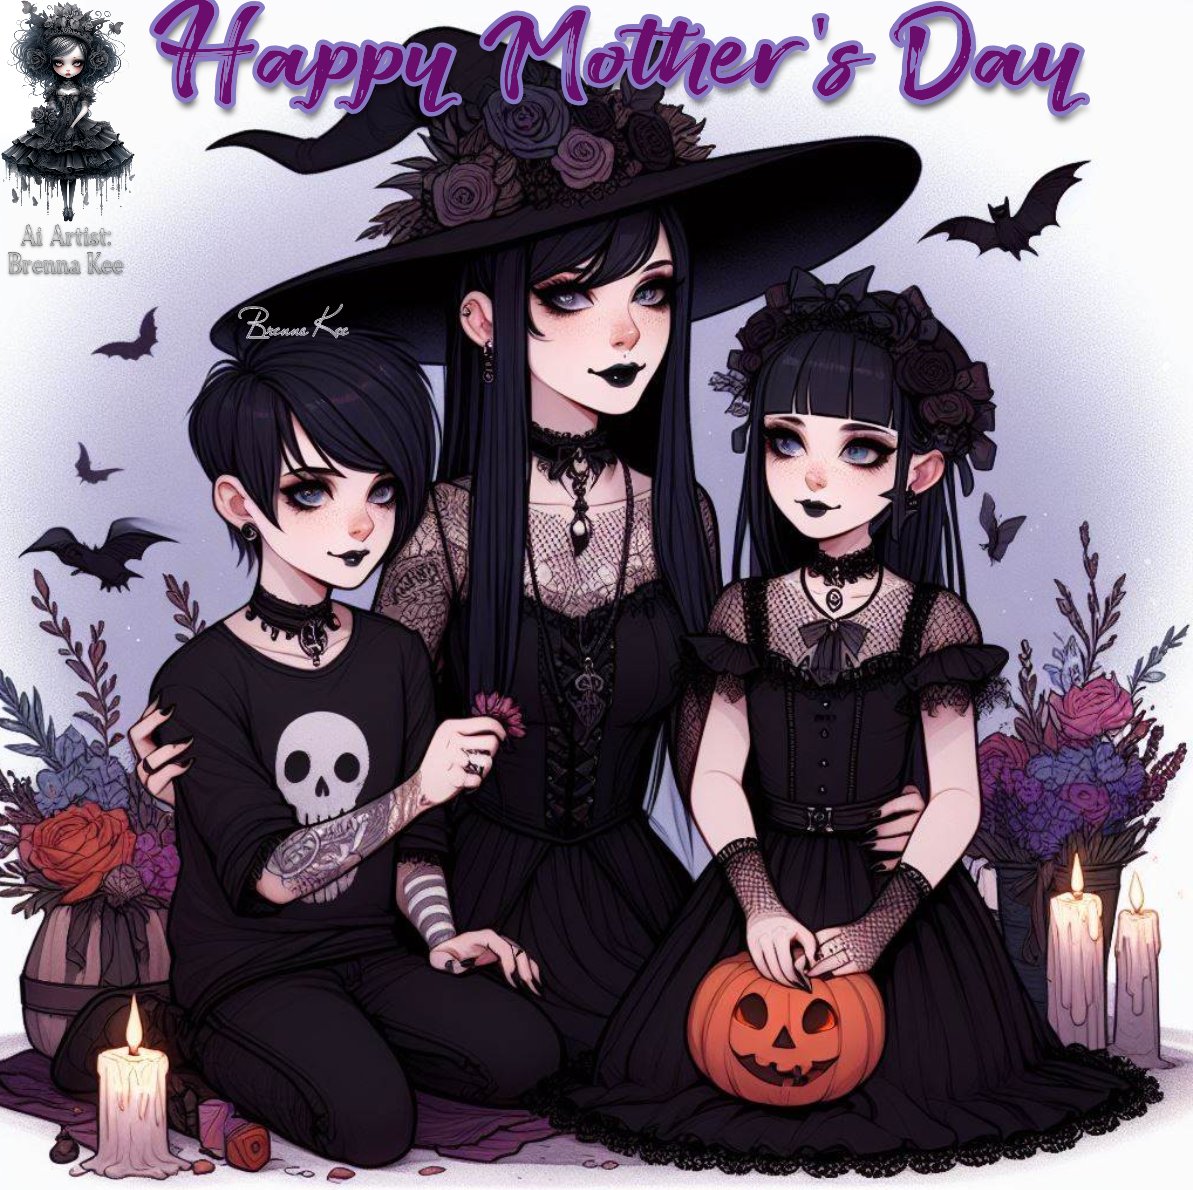 Happy Mother's Day💀🎃💜
#MothersDay @RAVYN_FYRE #FYP #fypviraltwitter #fypシ #fypシviral #witchy #witchyvibes #gothvibes #gothicvibes